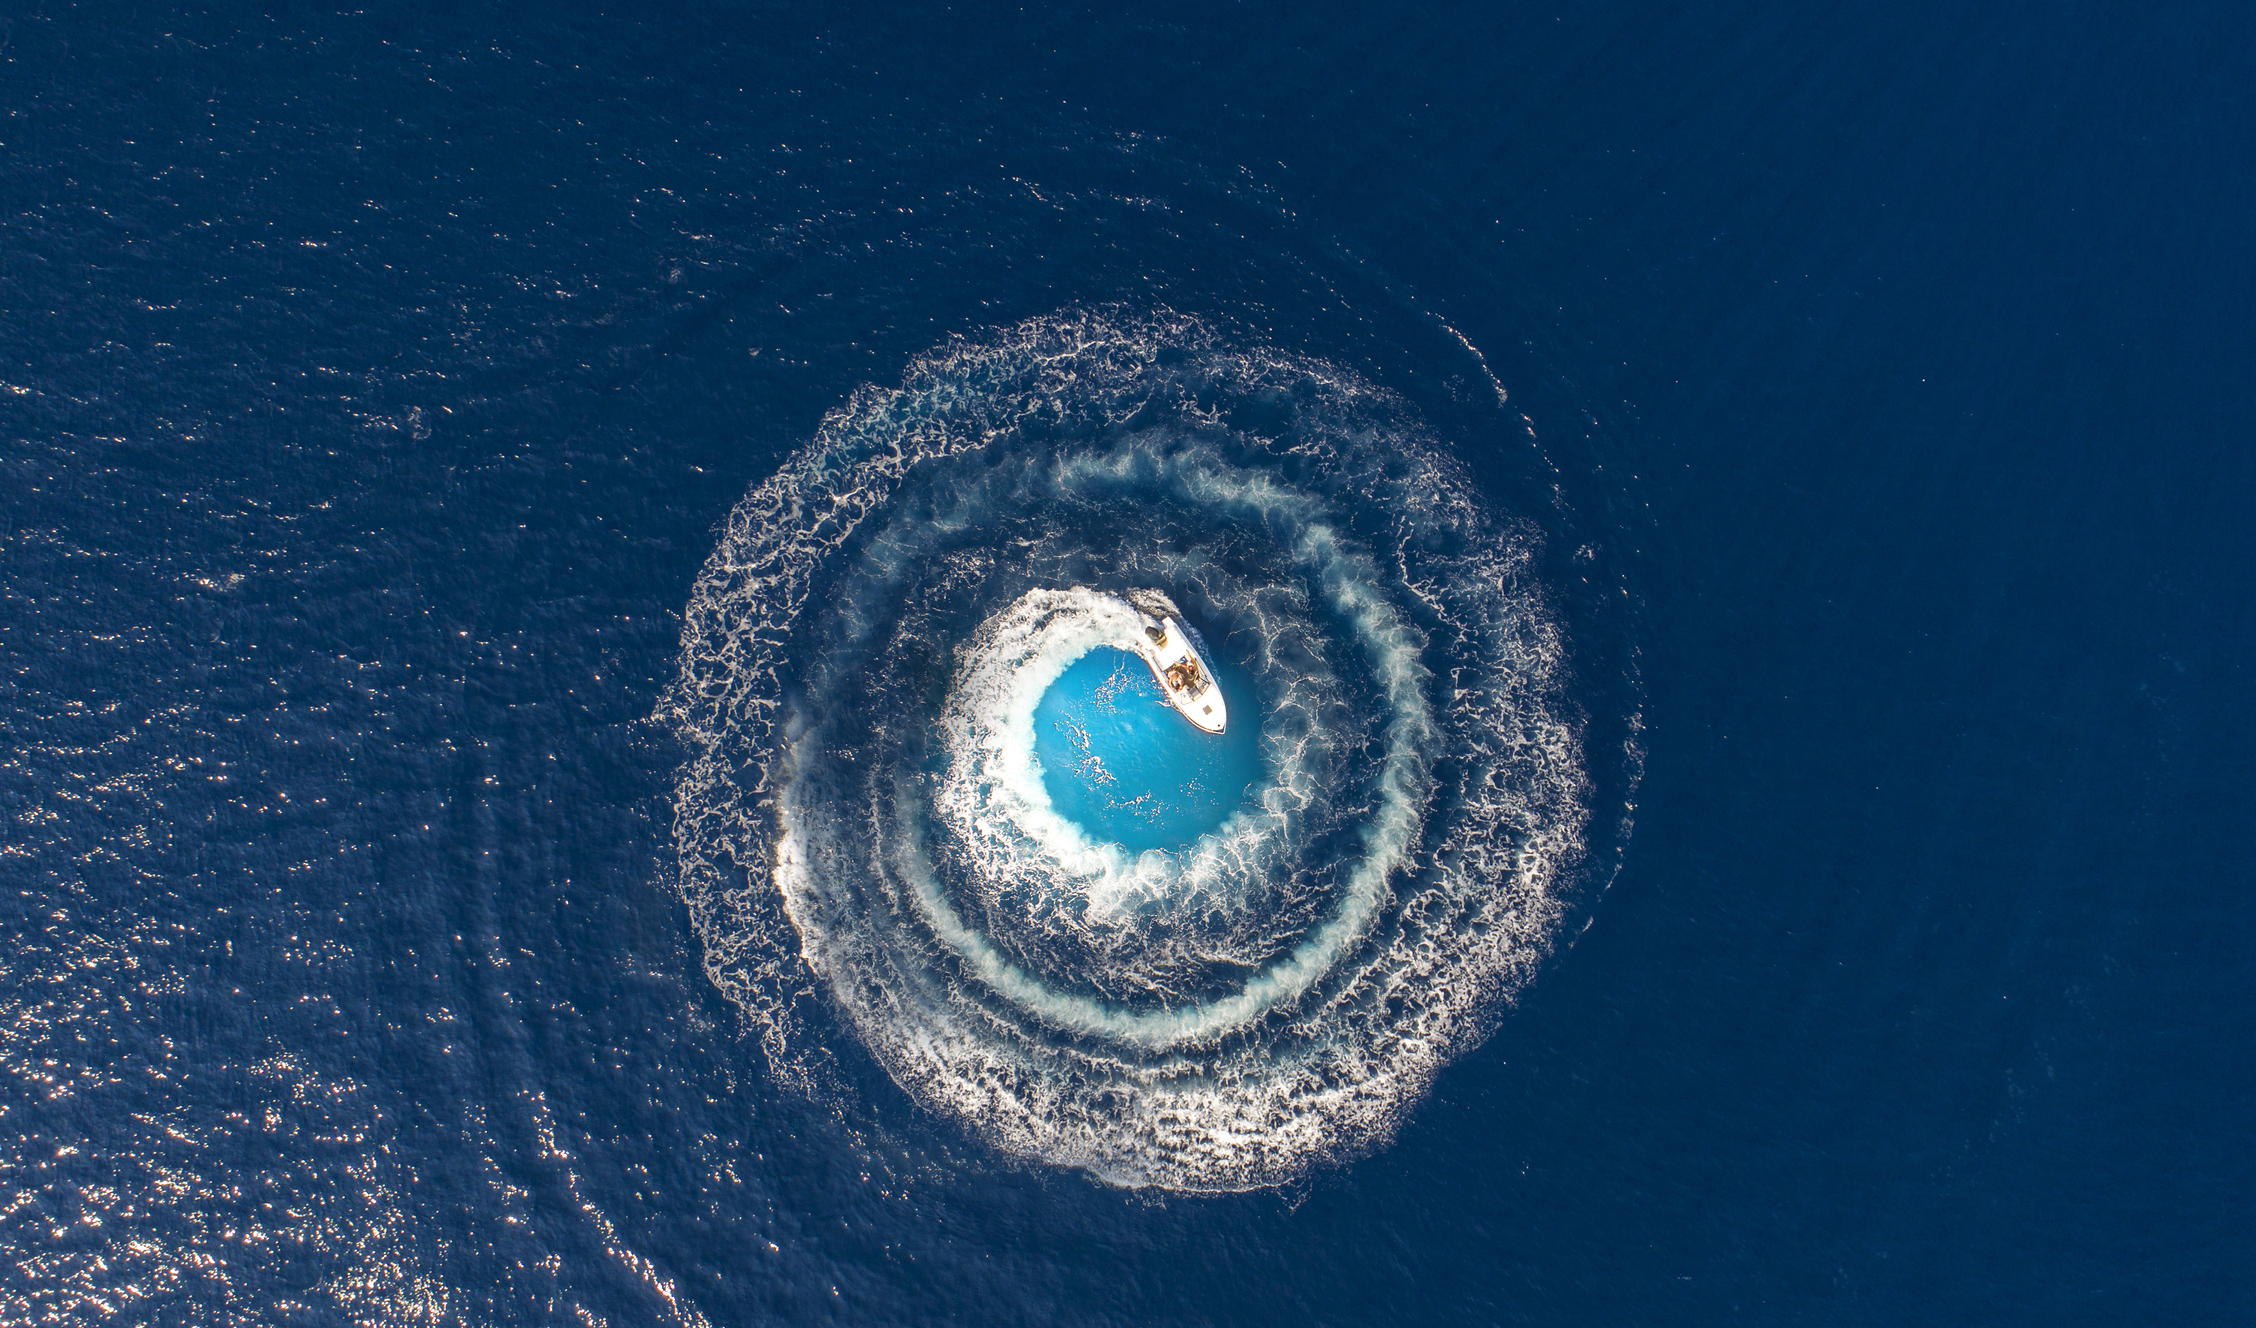 A Boat Is Driving In A Circle And Produces A Big Whirlpool